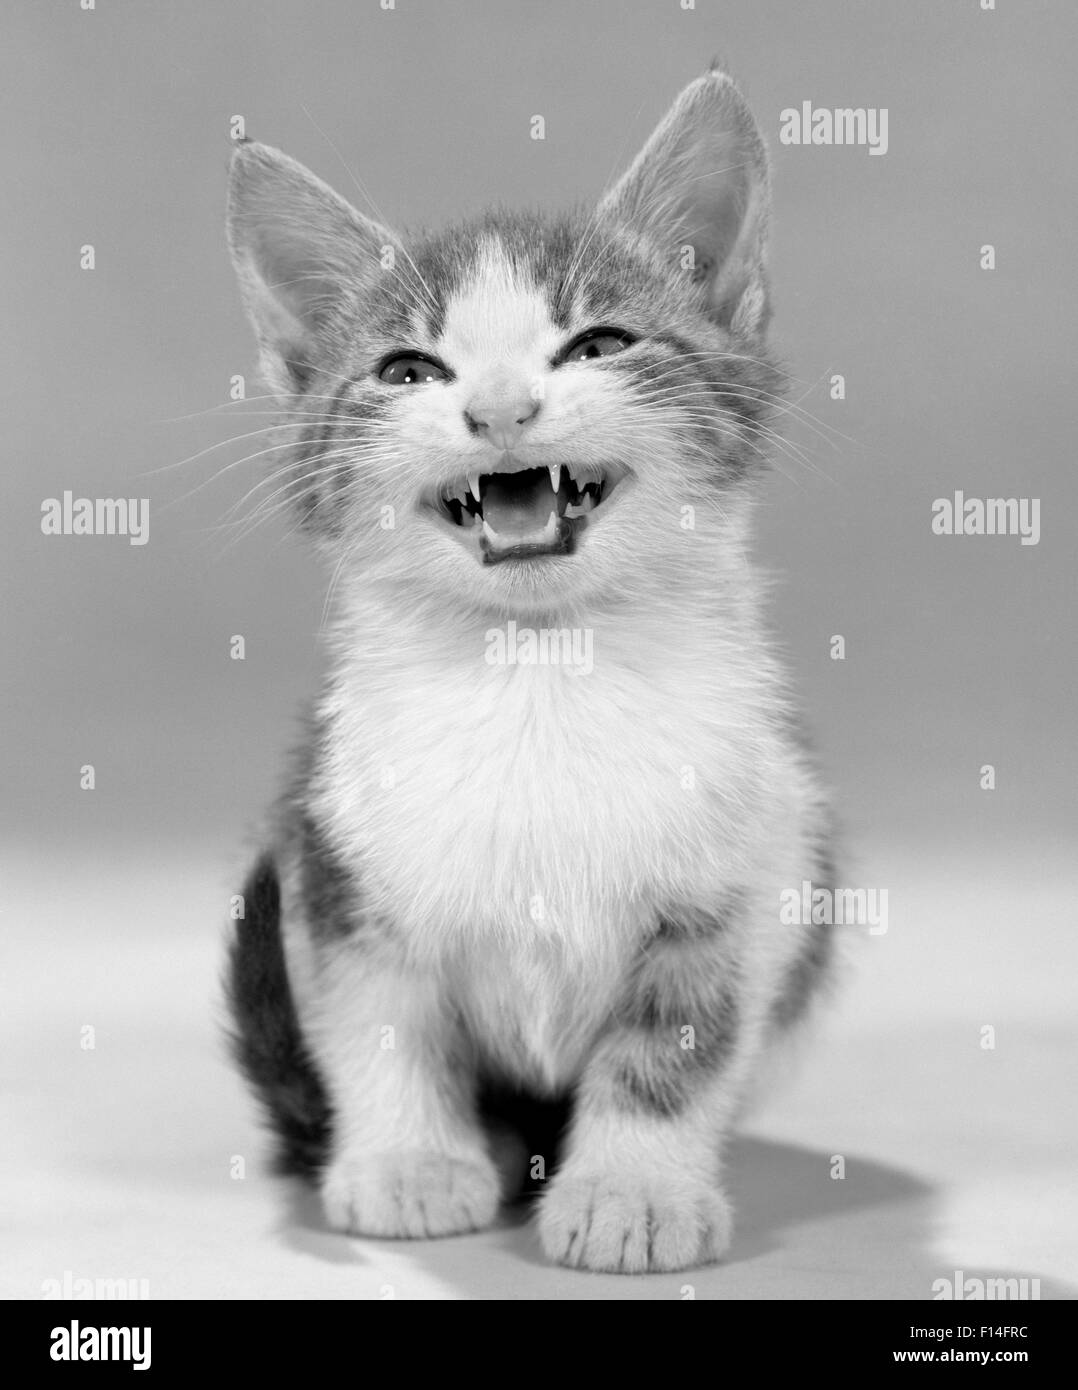 1960s MEOWING KITTEN TABBY SPOTS MOUTH OPEN HISSING LOOKING AT CAMERA Stock Photo